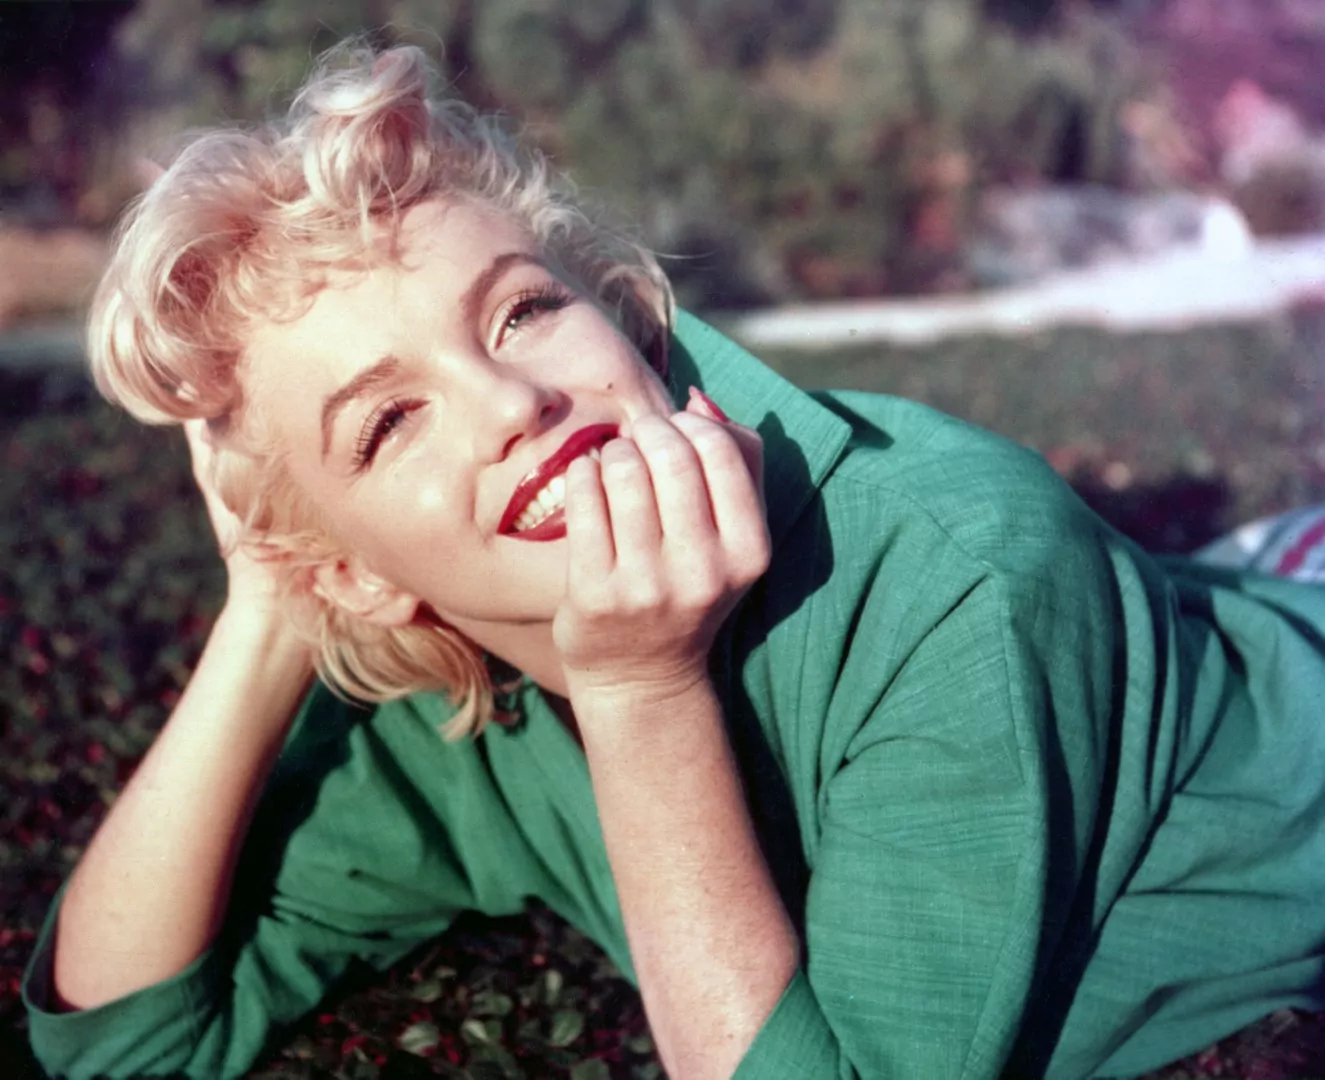 PALM SPRINGS, CA - 1954: Actress Marilyn Monroe poses for a portrait laying on the grass in 1954 in Palm Springs, California. (Photo by Baron/Hulton Archive/Getty Images)